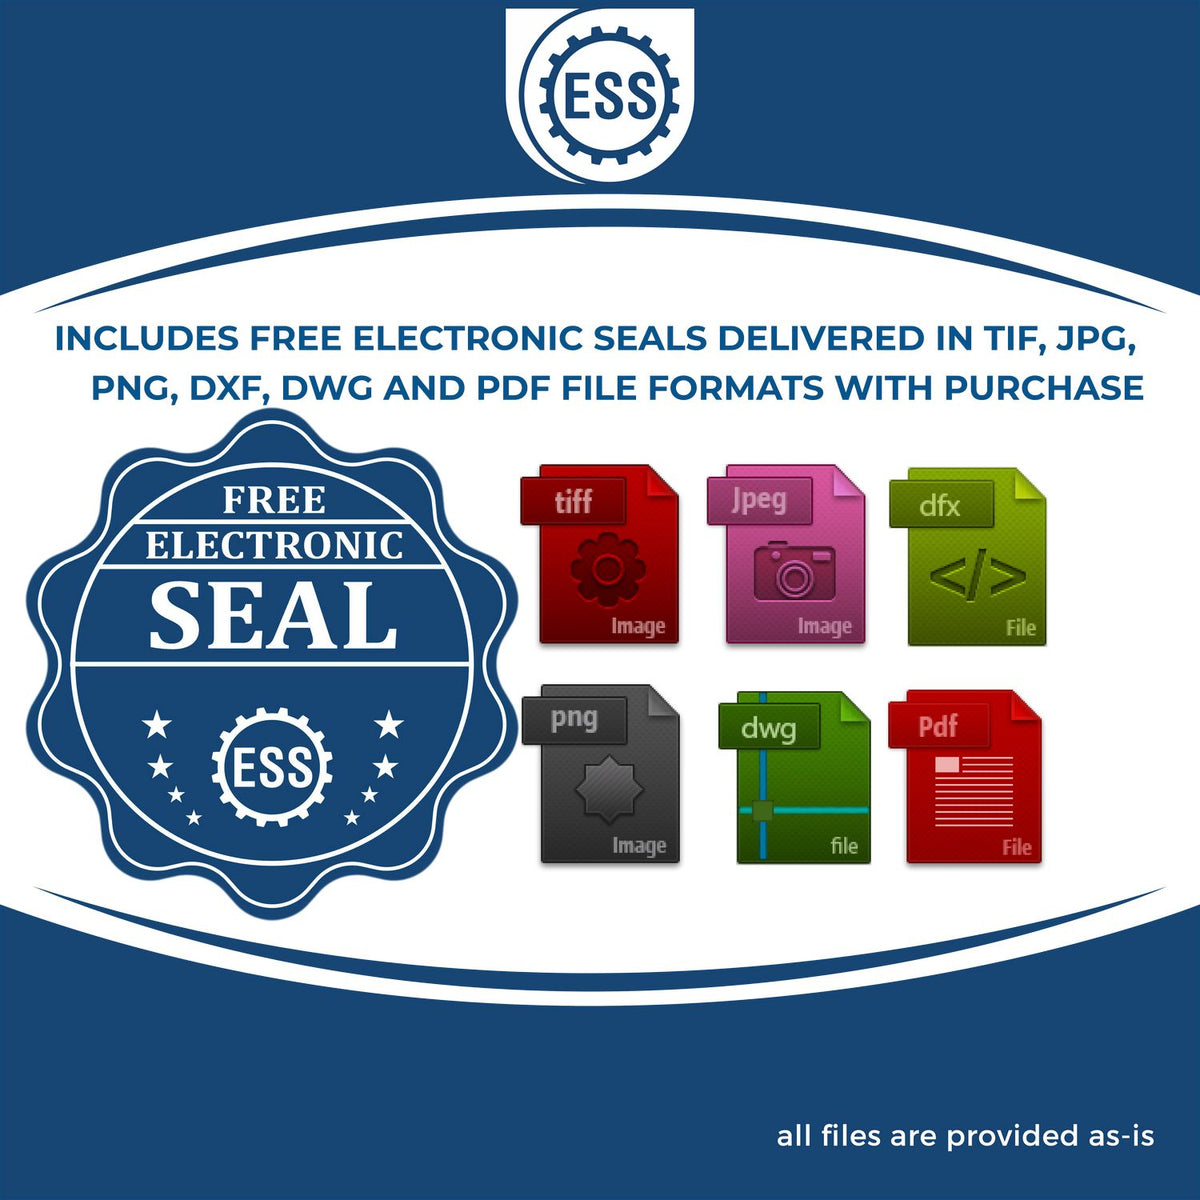 An infographic for the free electronic seal for the Heavy-Duty Arizona Rectangular Notary Stamp illustrating the different file type icons such as DXF, DWG, TIF, JPG and PNG.